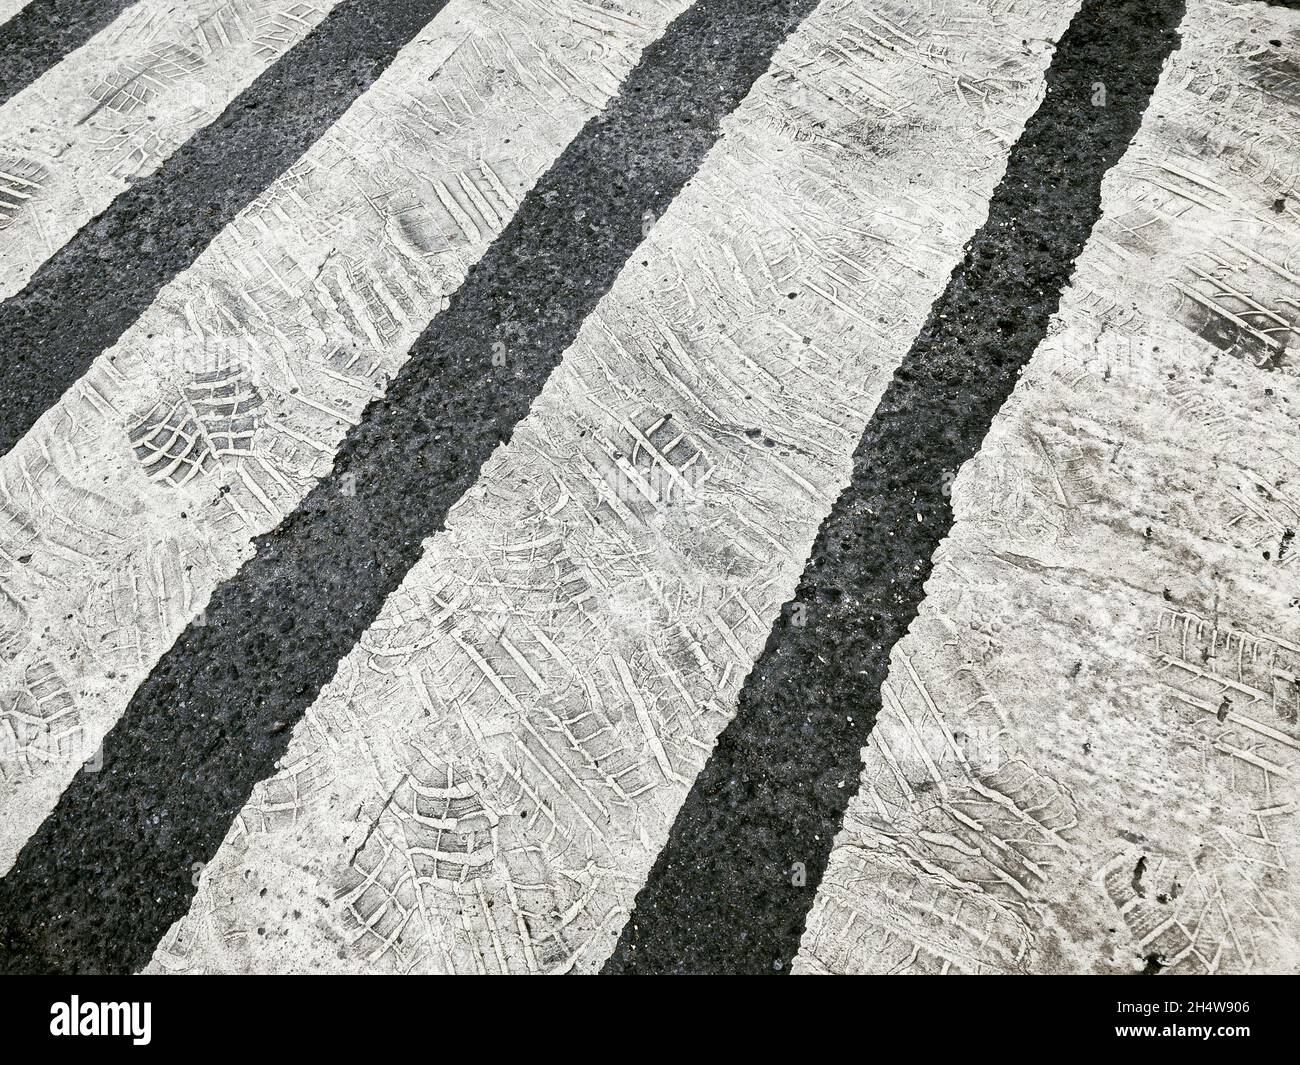 old zebra crossing on the city road with multiple imprints of tires Stock Photo